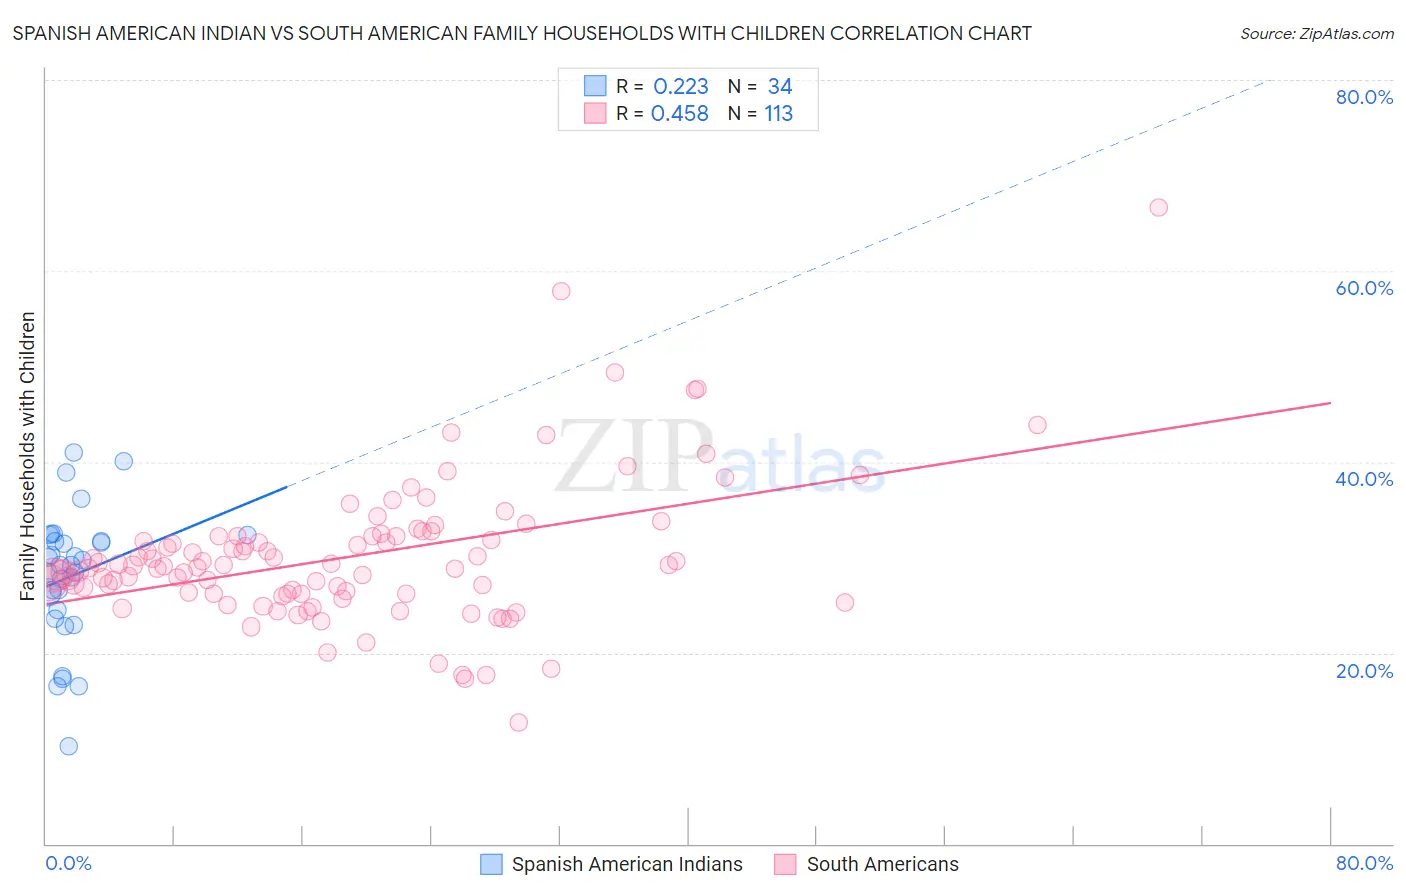 Spanish American Indian vs South American Family Households with Children